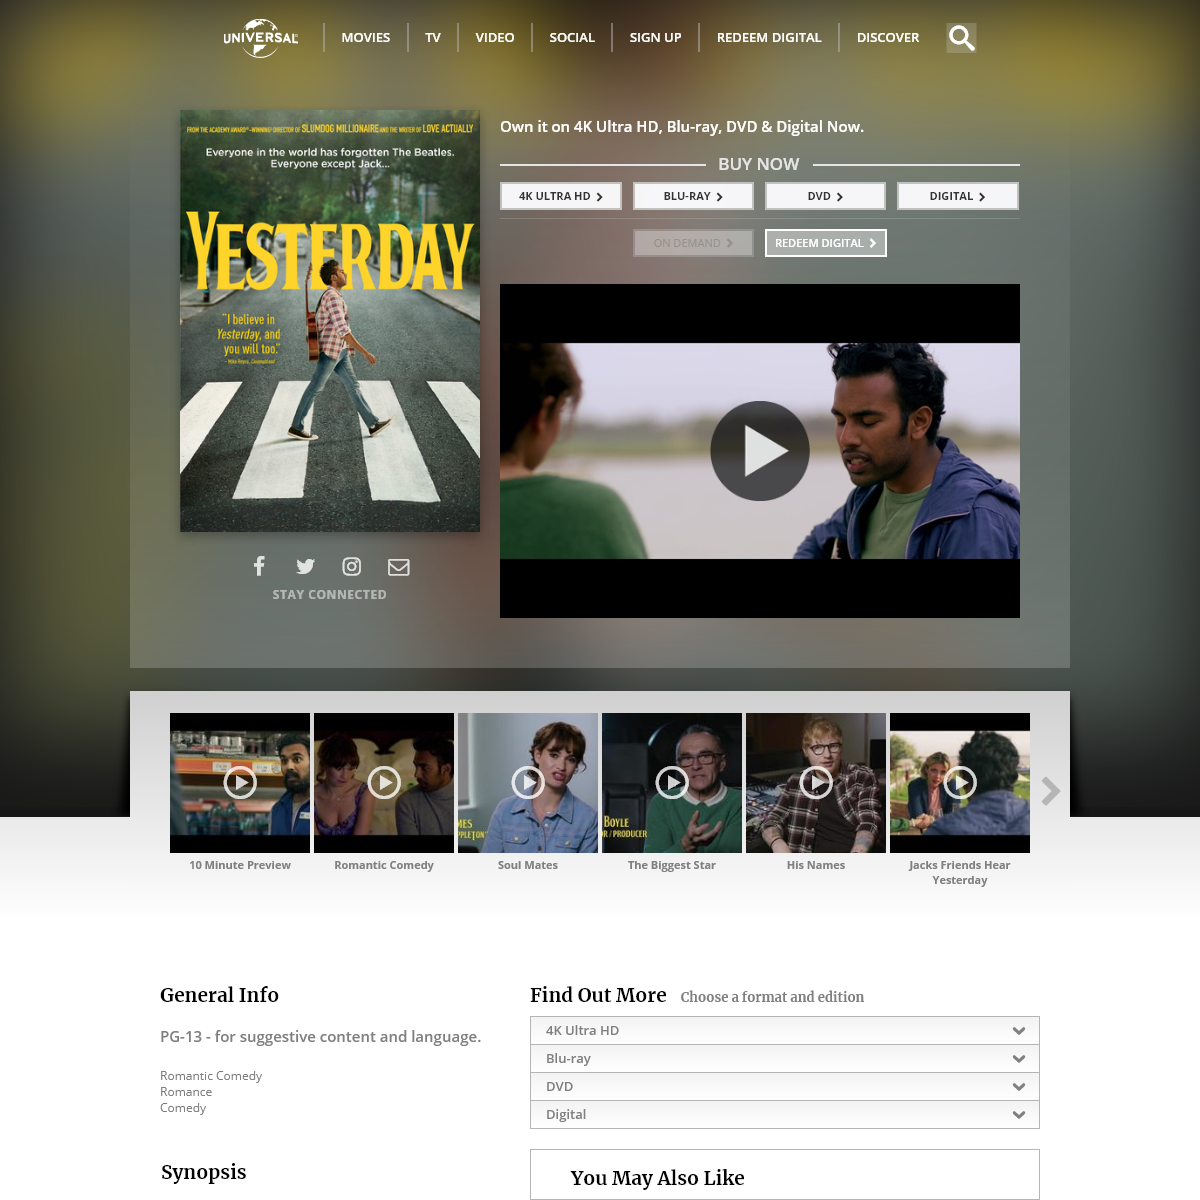 A complete backup of yesterdaymovie.com